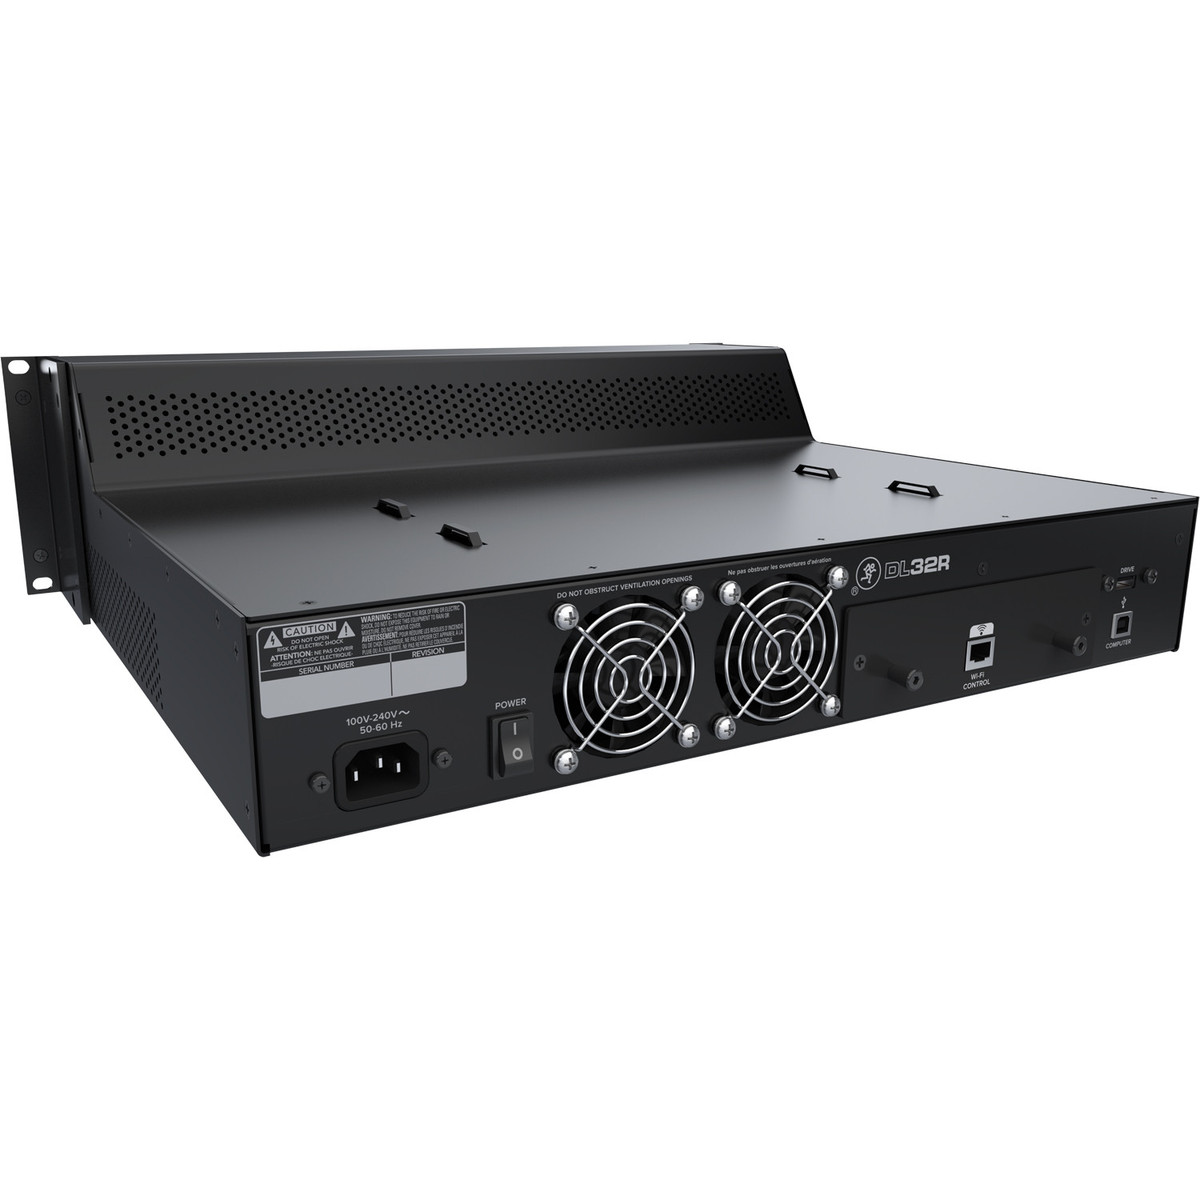 Mackie Dl32r Pour Ipad - Recorder in rack - Variation 4